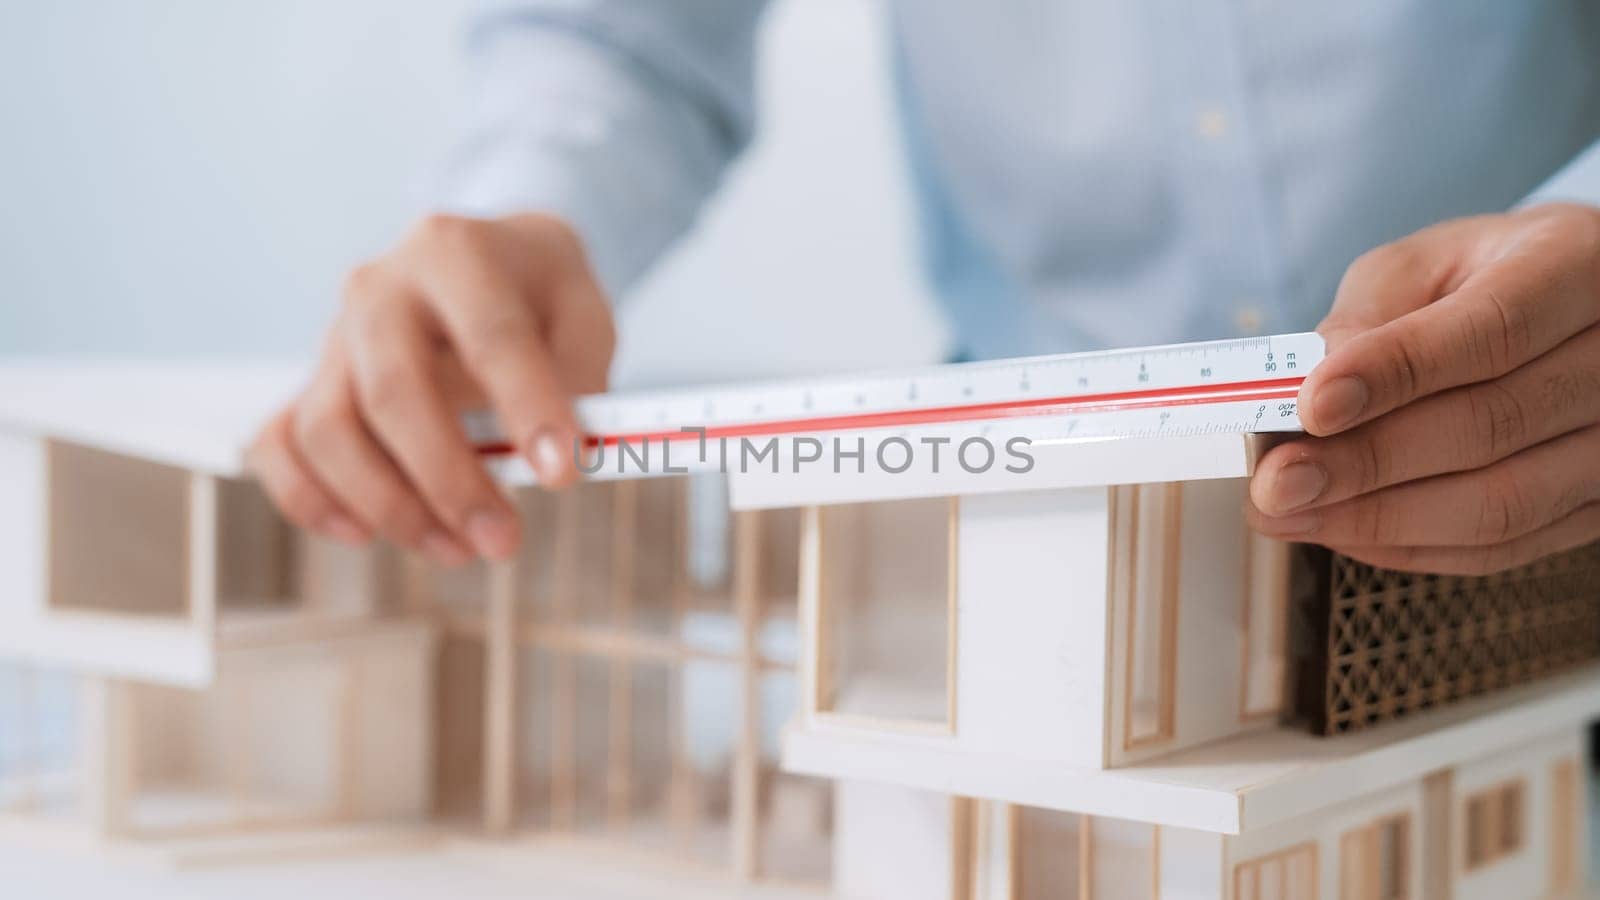 Closeup image of professional male architect engineer hand uses ruler to measure house model at modern office. Creative living and design concept. Blurring background. Focus on hand. Immaculate